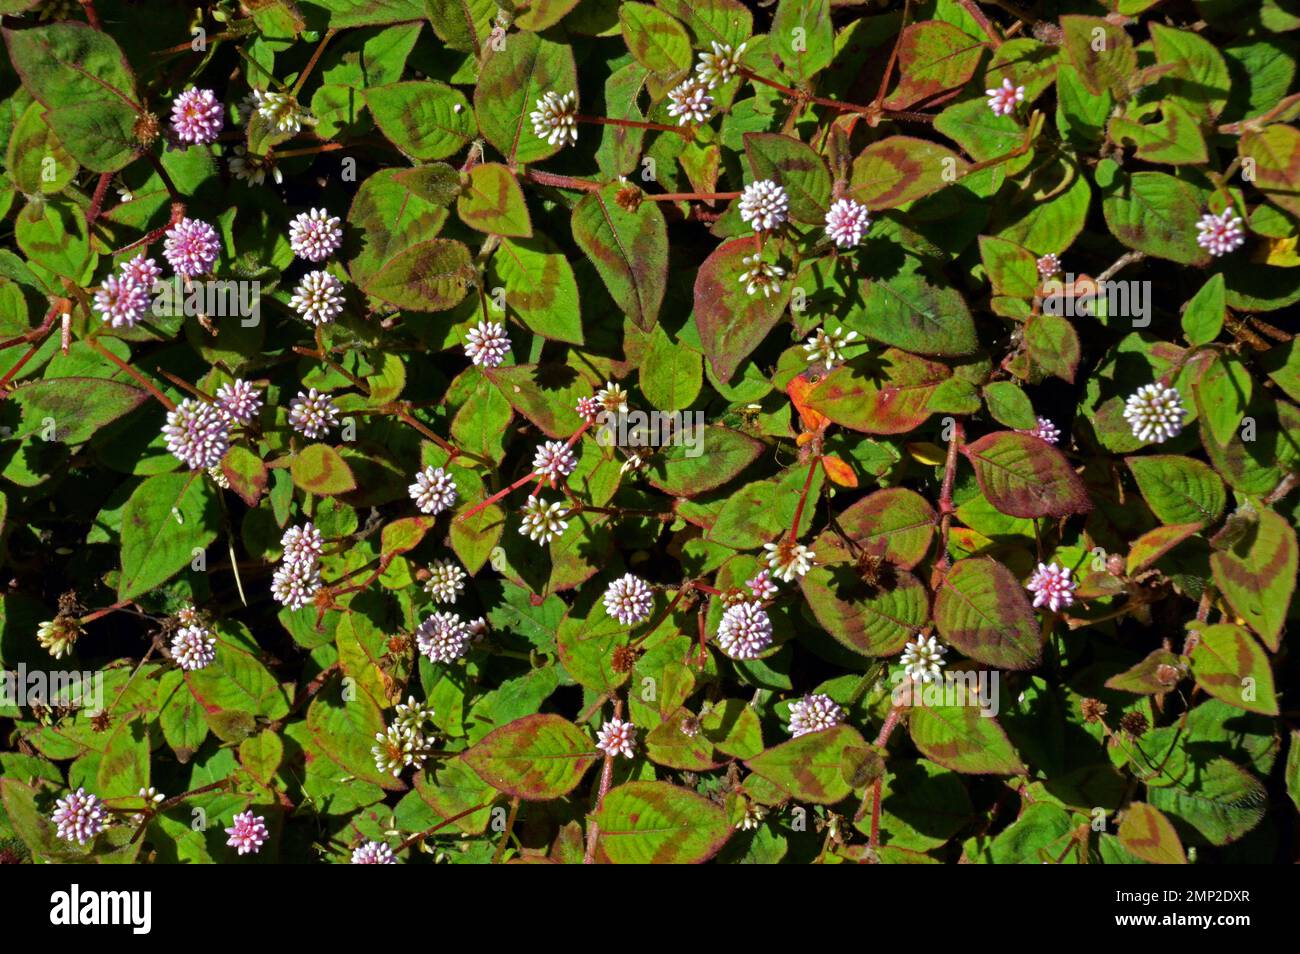 Portugal, Azores Islands, Sao Miguel, Pico da Barrosa:   Pinkhead Smartweed or Pink Knotweed (Polygonum capitatum), a prostrate perennial of Himalayan Stock Photo